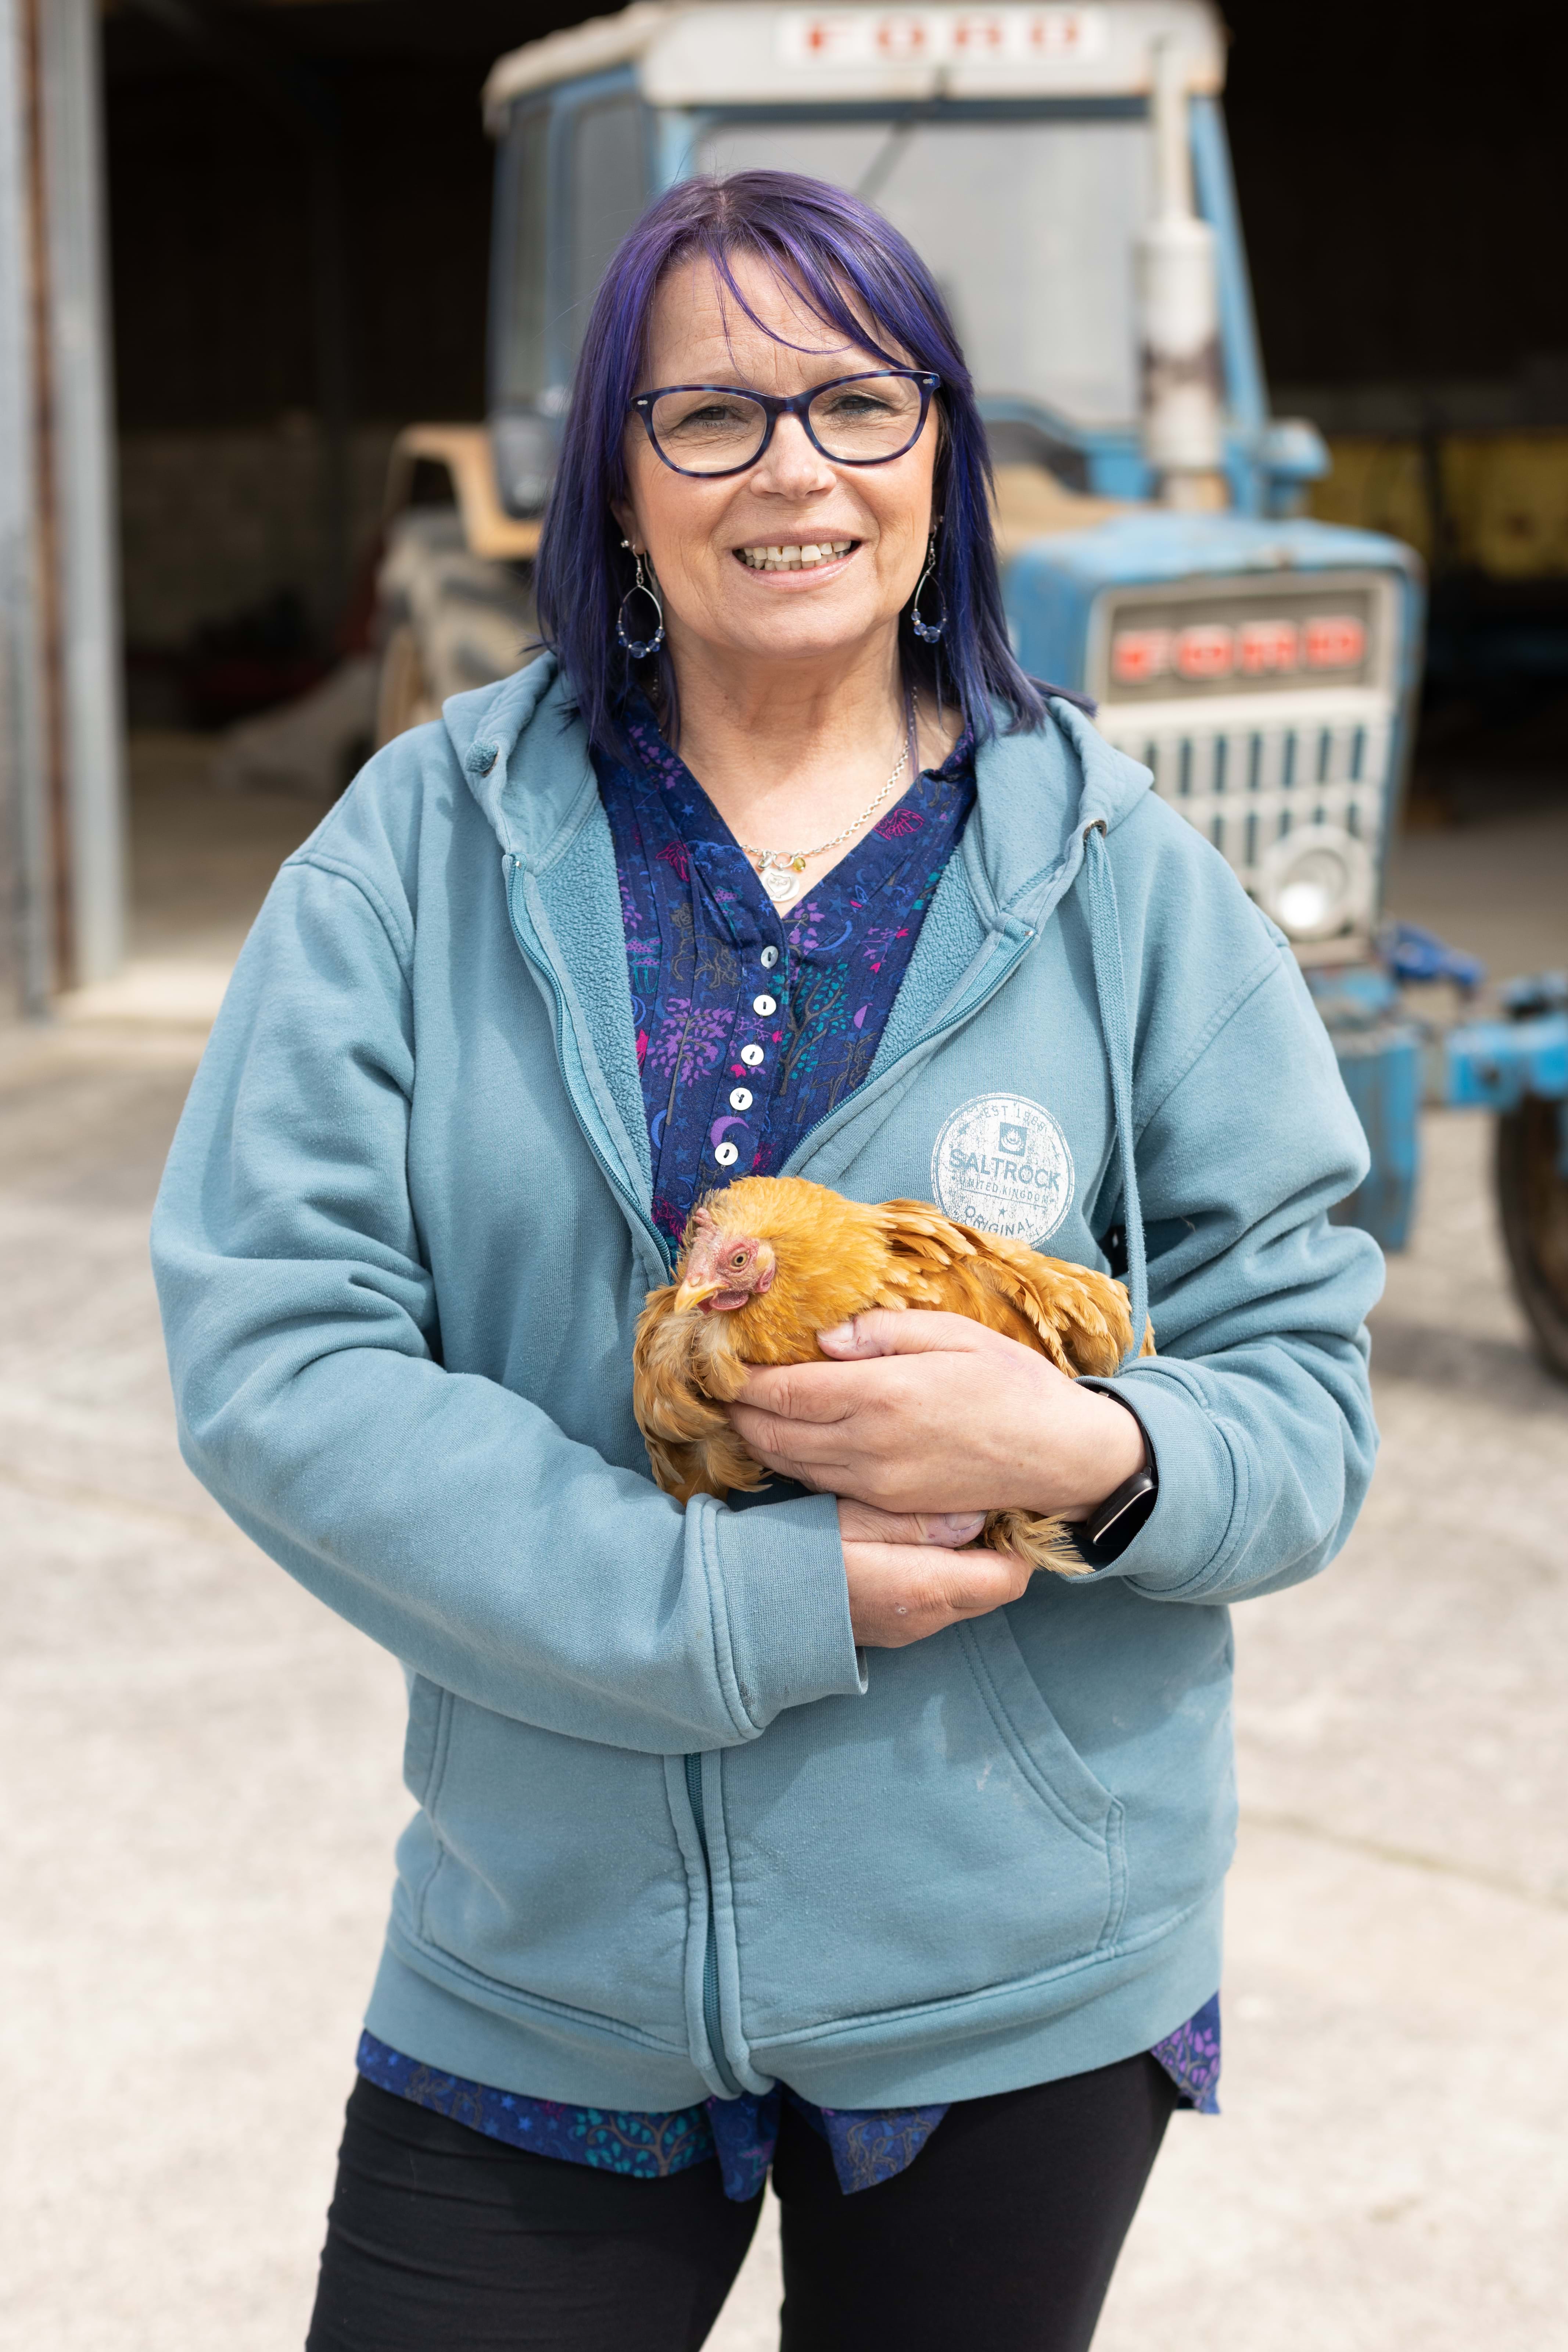 An image of a woman holding a chicken